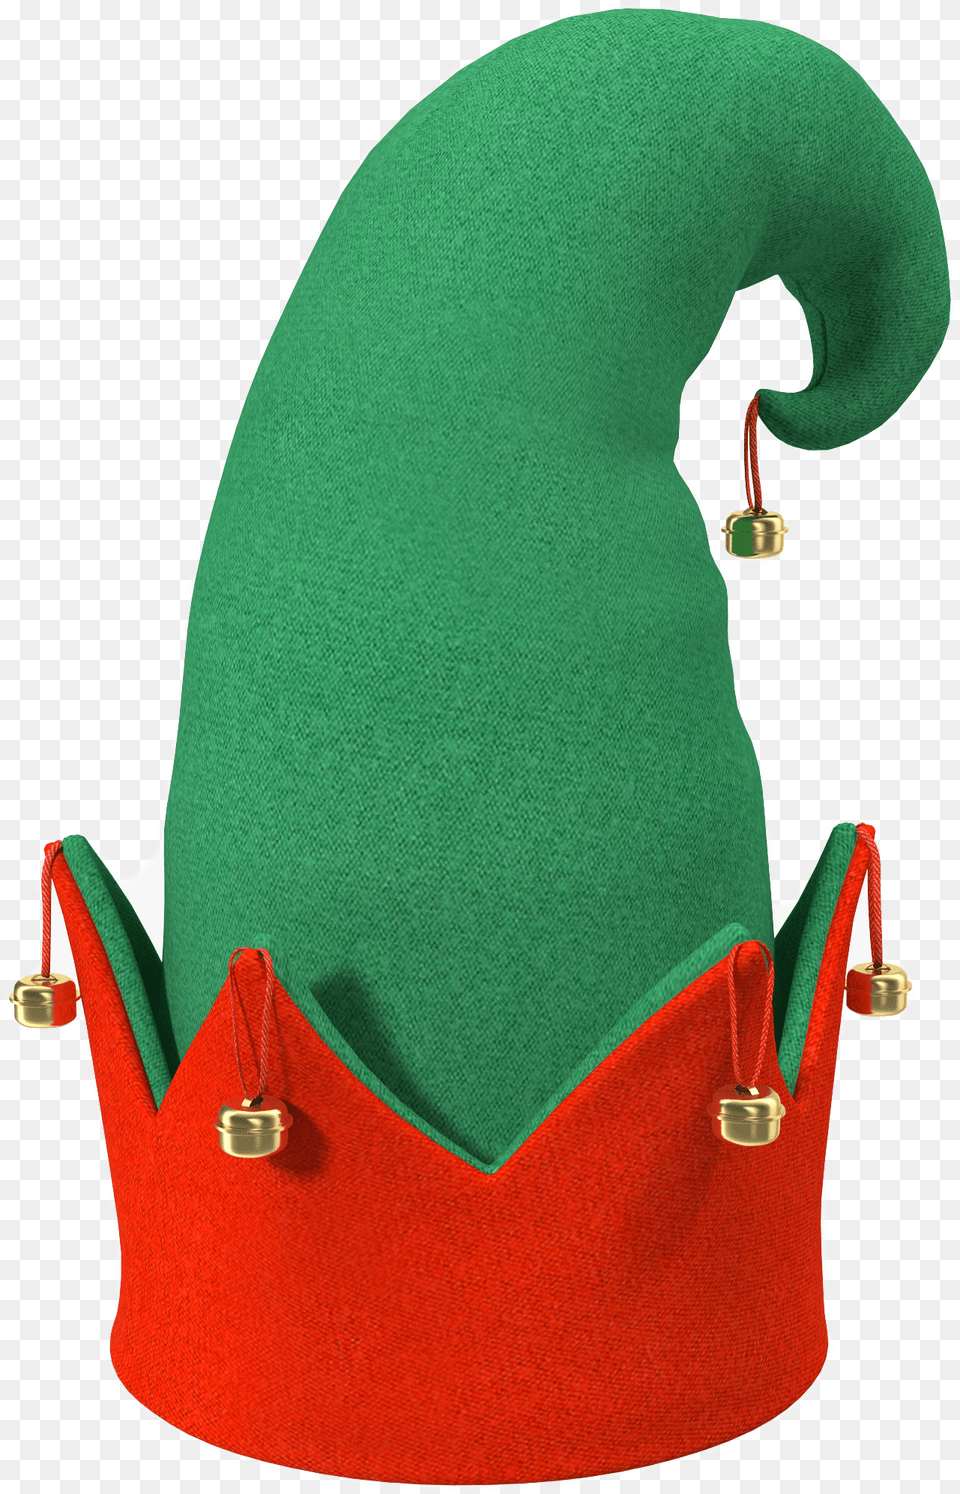 Christmas Christmashat Elf Elfhat Hat Transparent Background Elf Hat, Cushion, Home Decor, Clothing, Accessories Png